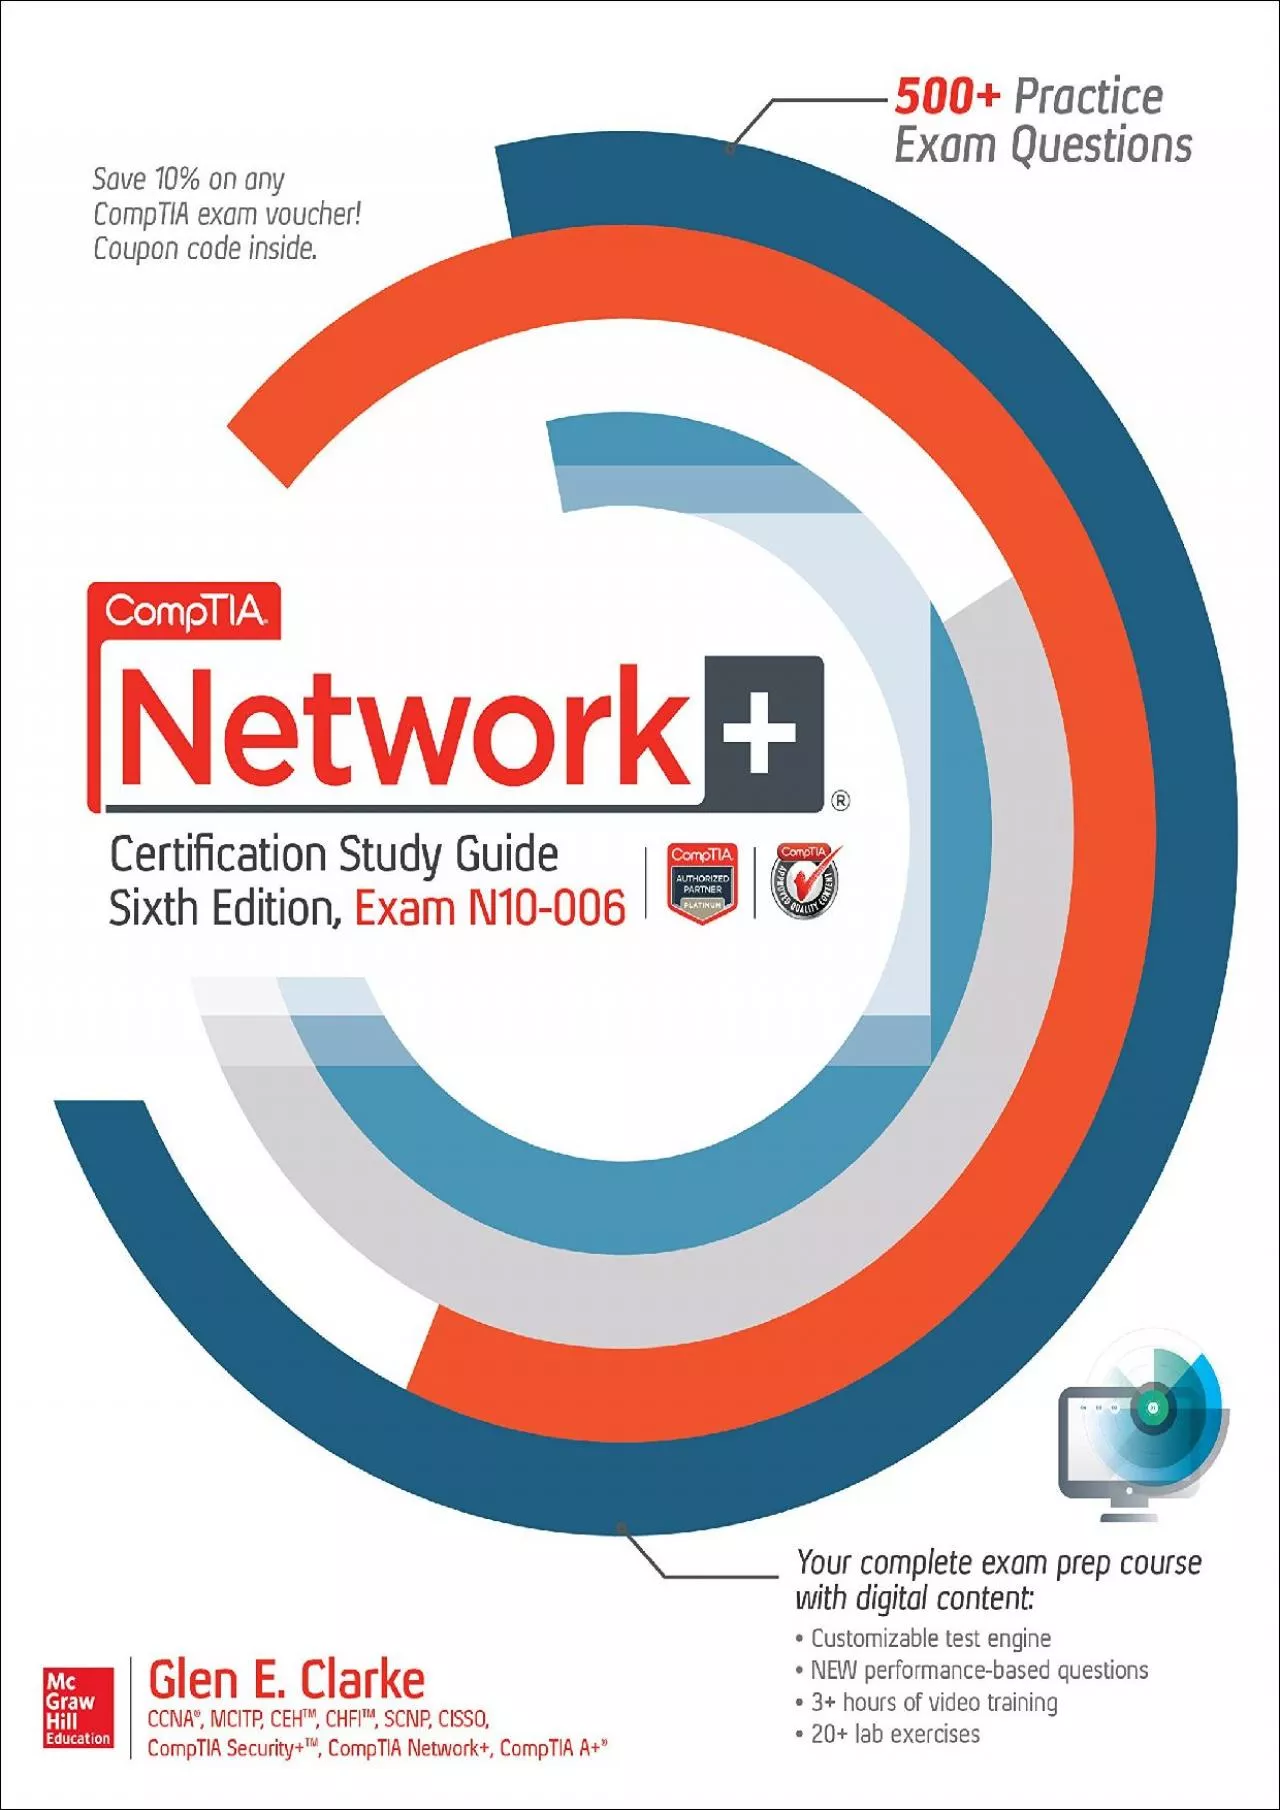 [BEST]-CompTIA Network+ Certification Study Guide, Sixth Edition (Exam N10-006) (Certification